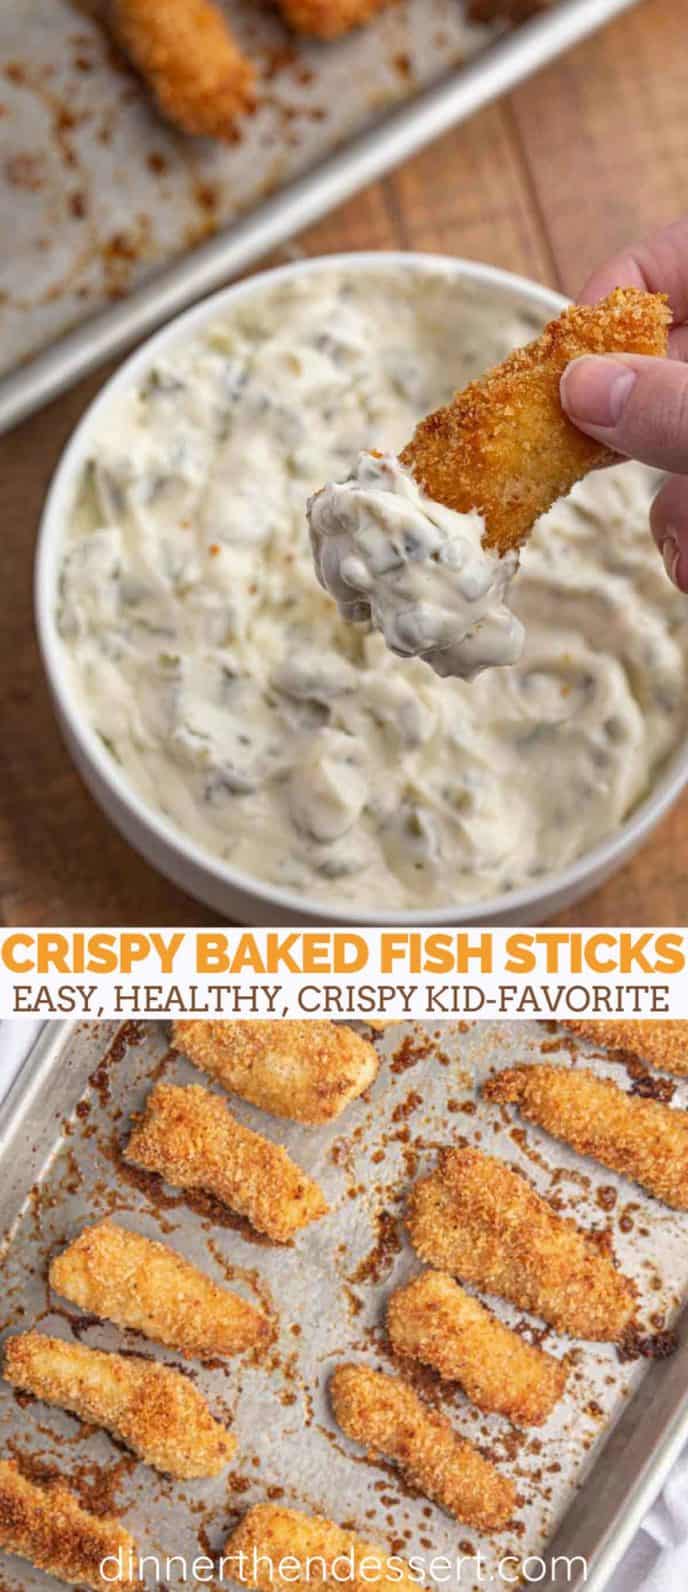 Baked fish sticks in a pan and with tartar sauce